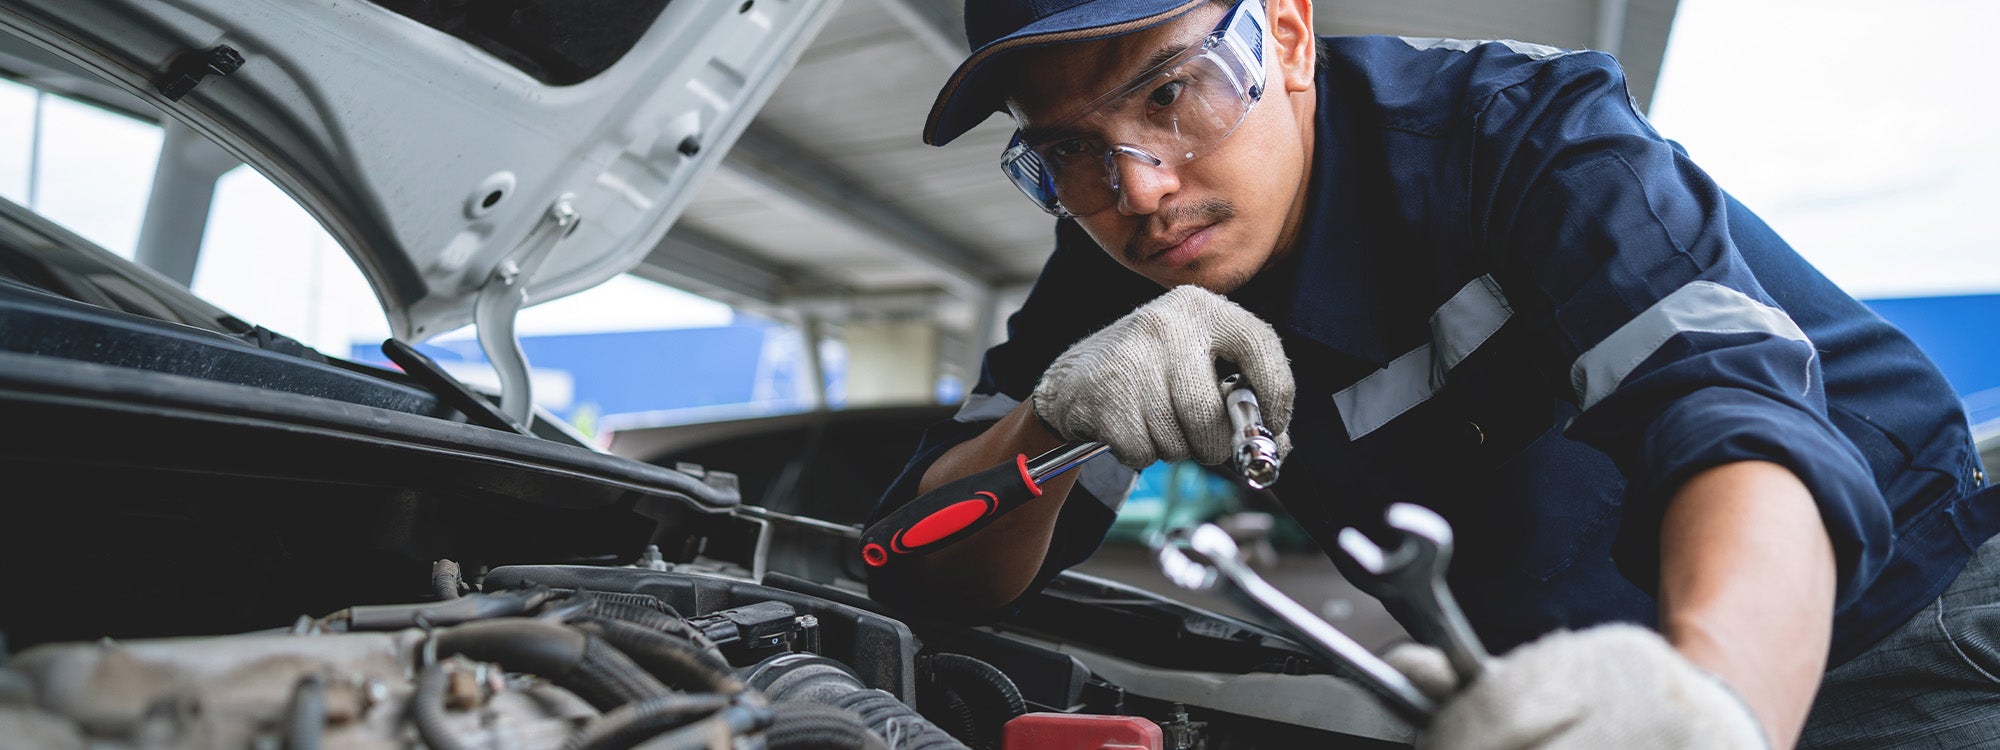 Expert Technicians at Blake Ford